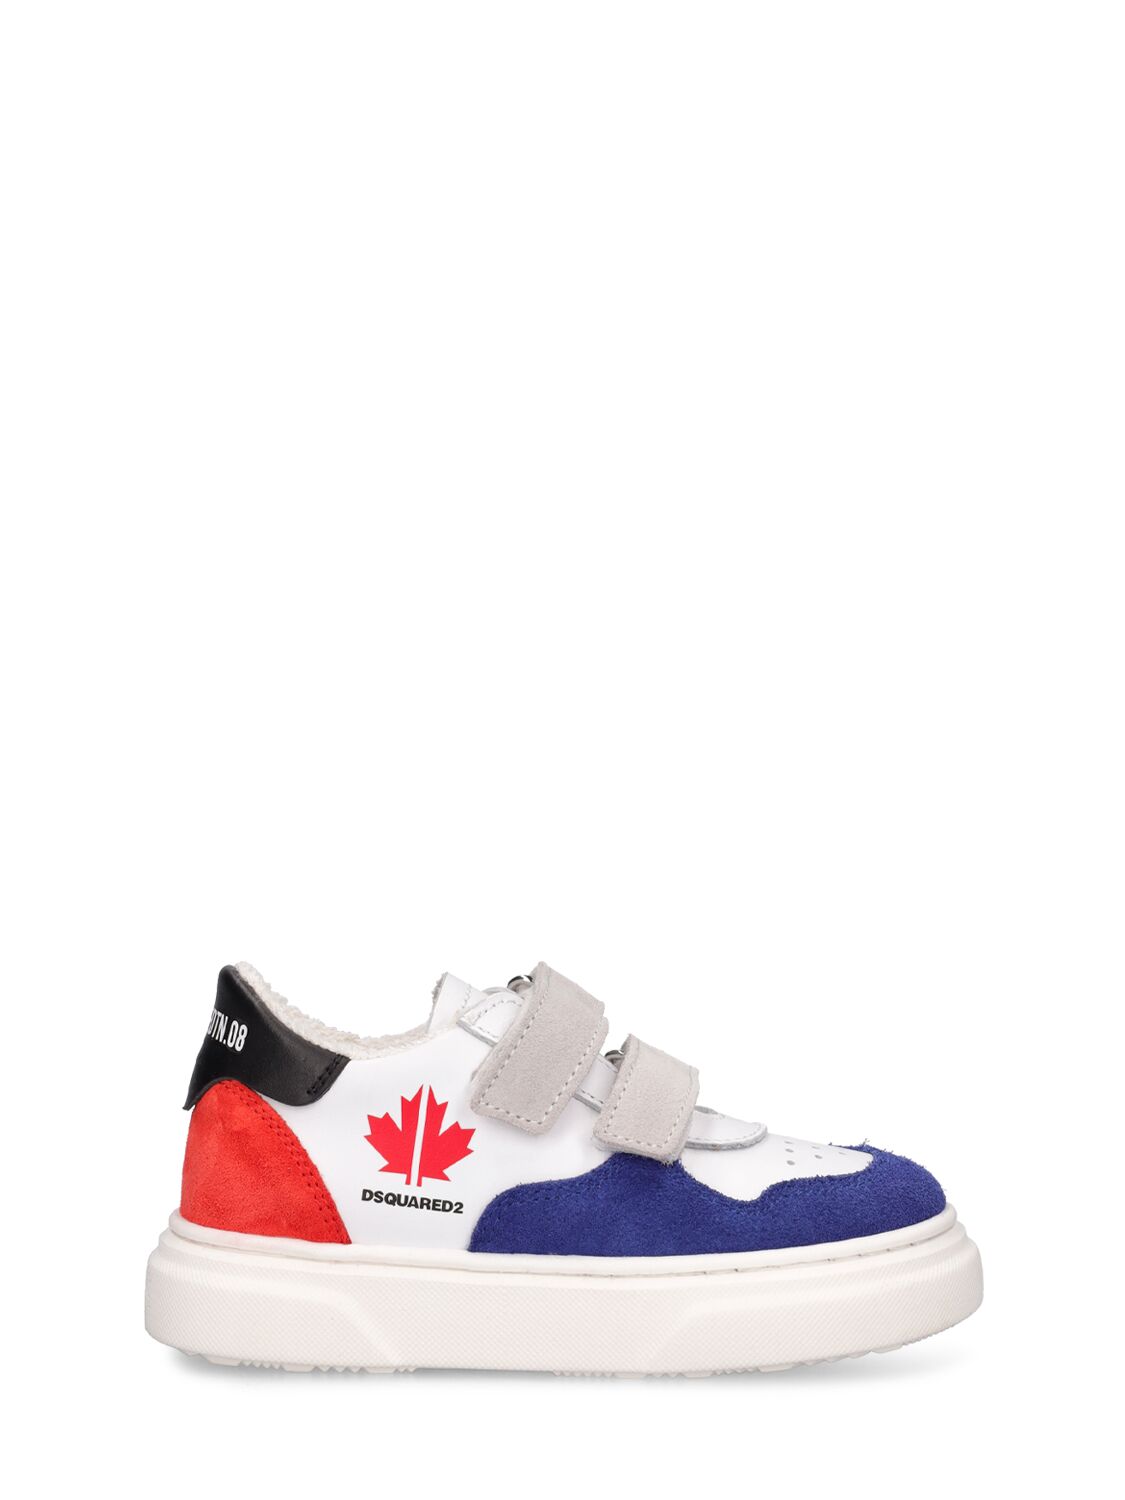 Dsquared2 Kids' Printed Leather Strap Trainers In Blue,white